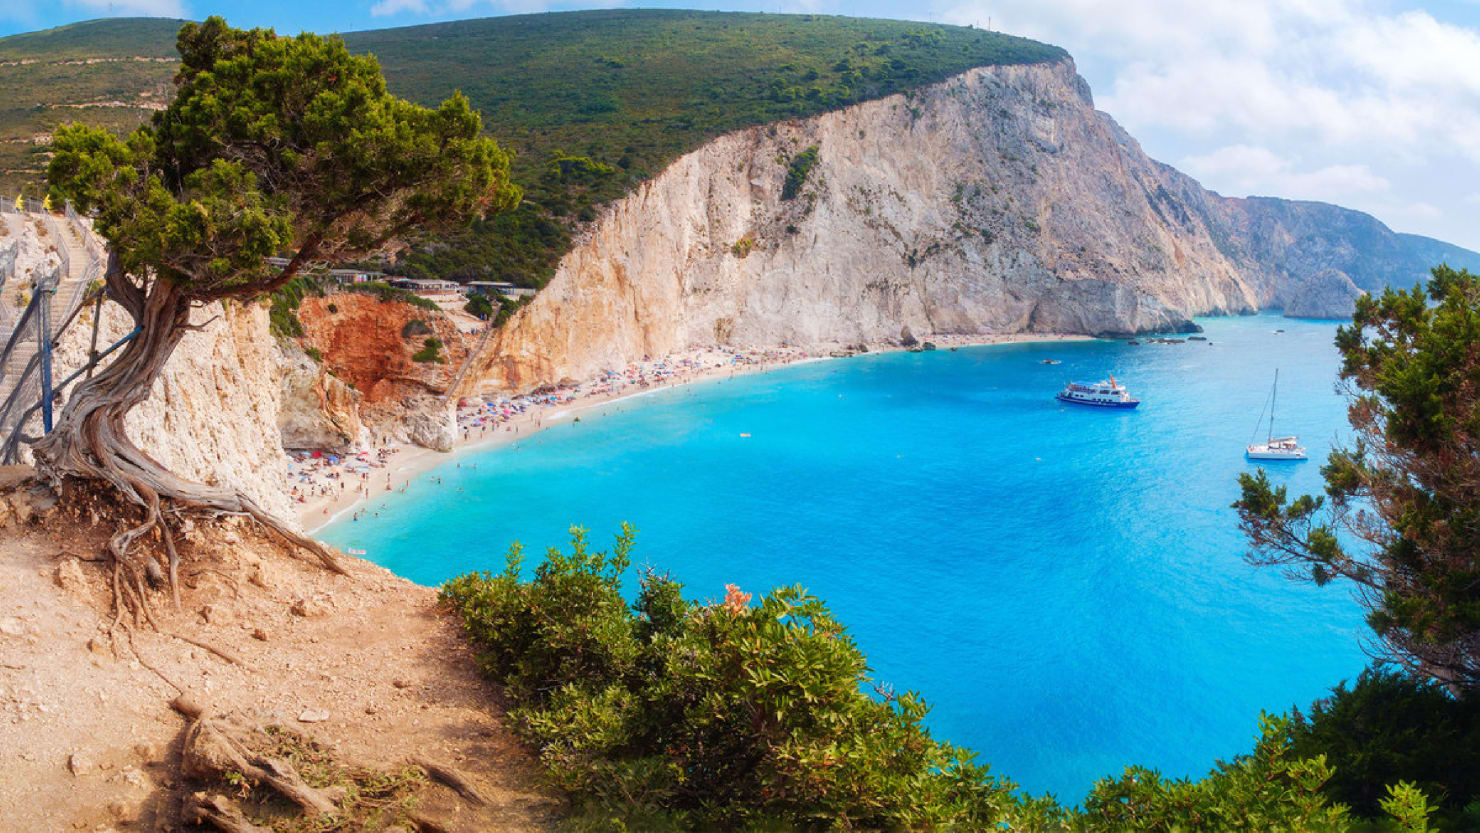 This Greek Island May Be Its Most Beautiful (And You’ve Probably Never Heard of It)